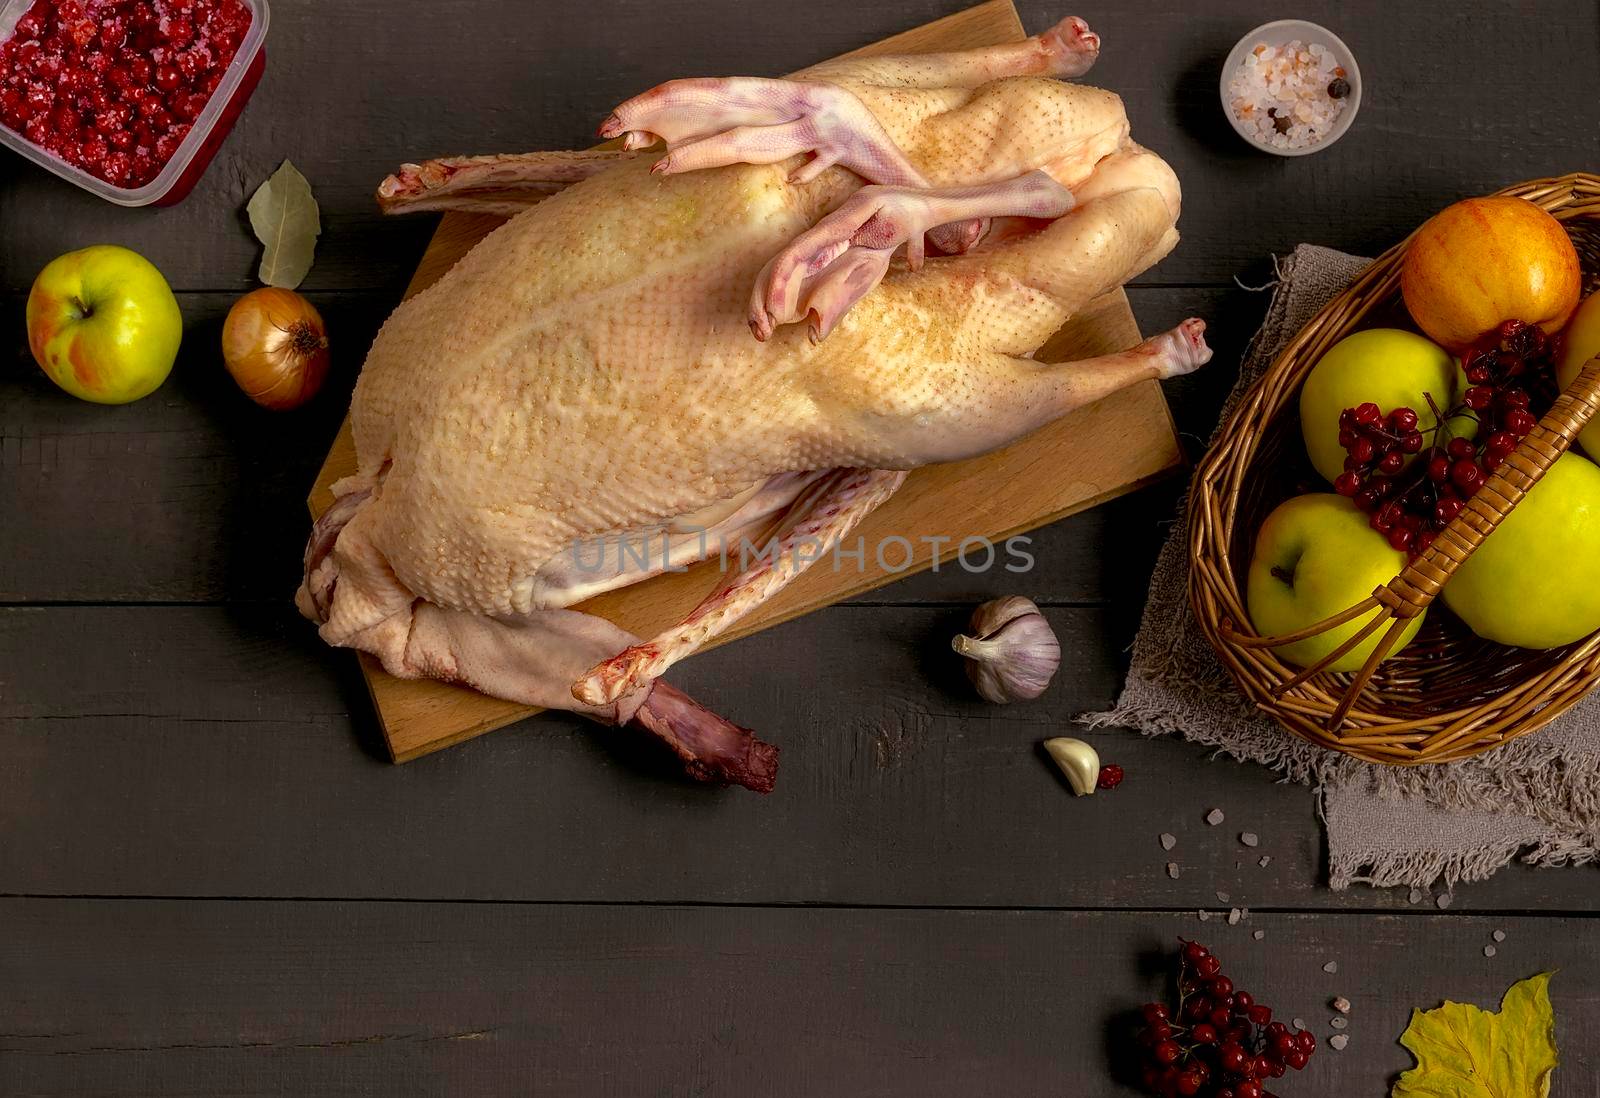 On the kitchen table there is a duck carcass next to the products for its further preparation: apples and berries for stuffing, spices and vegetables